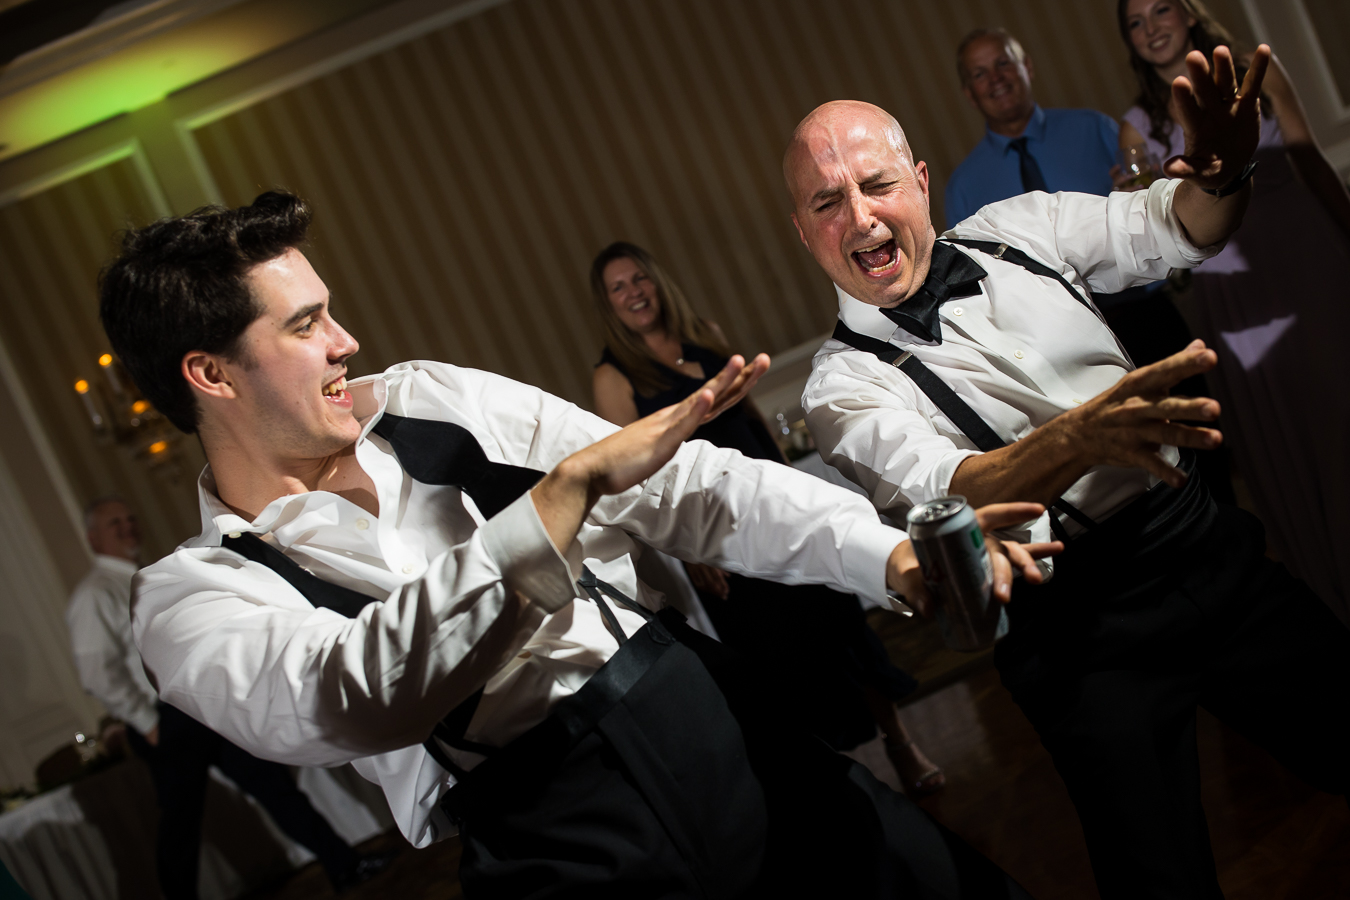 creative, fun wedding photographer, lisa rhinehart, captures this fun image of groomsmen and the dad dancing together and having a good time at this wedding reception in york